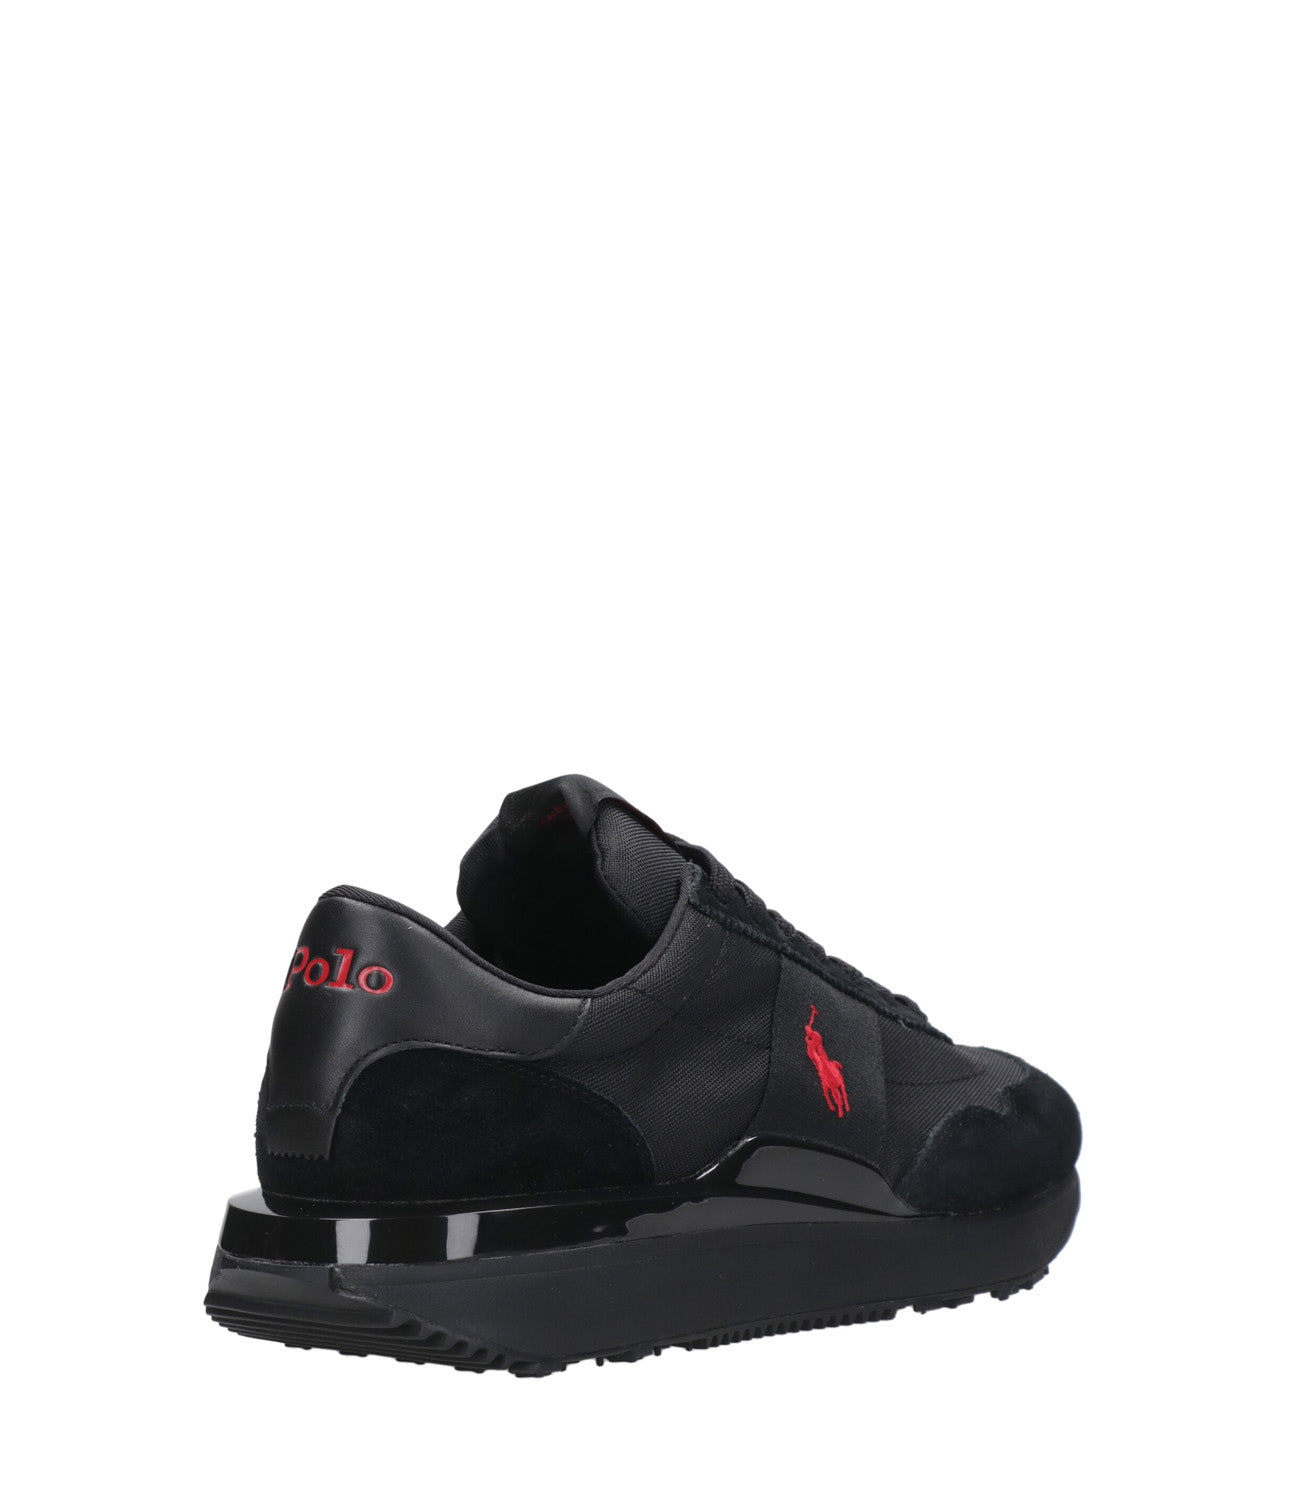 Polo Ralph Lauren | Train 89 Black and Red Sneakers